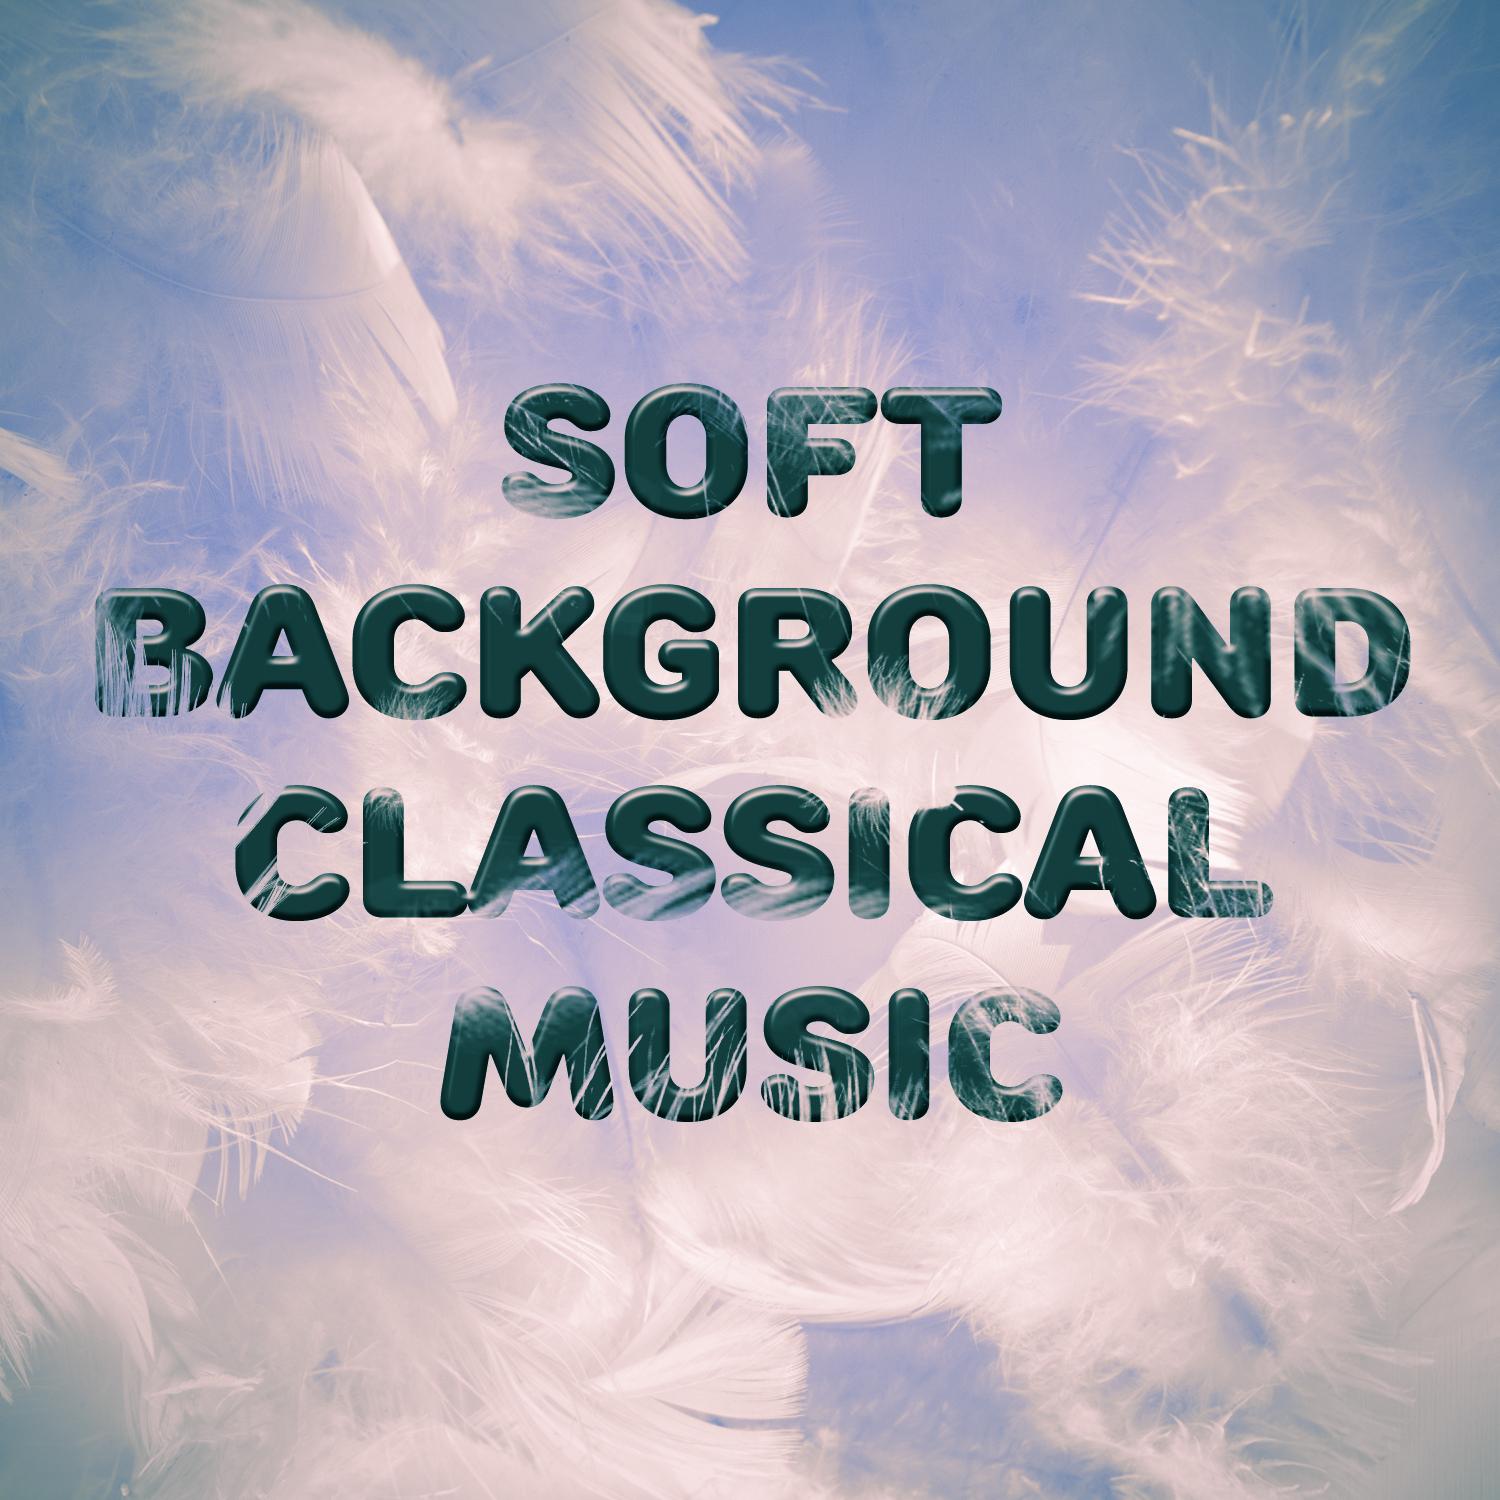 Soft Background Classical Music